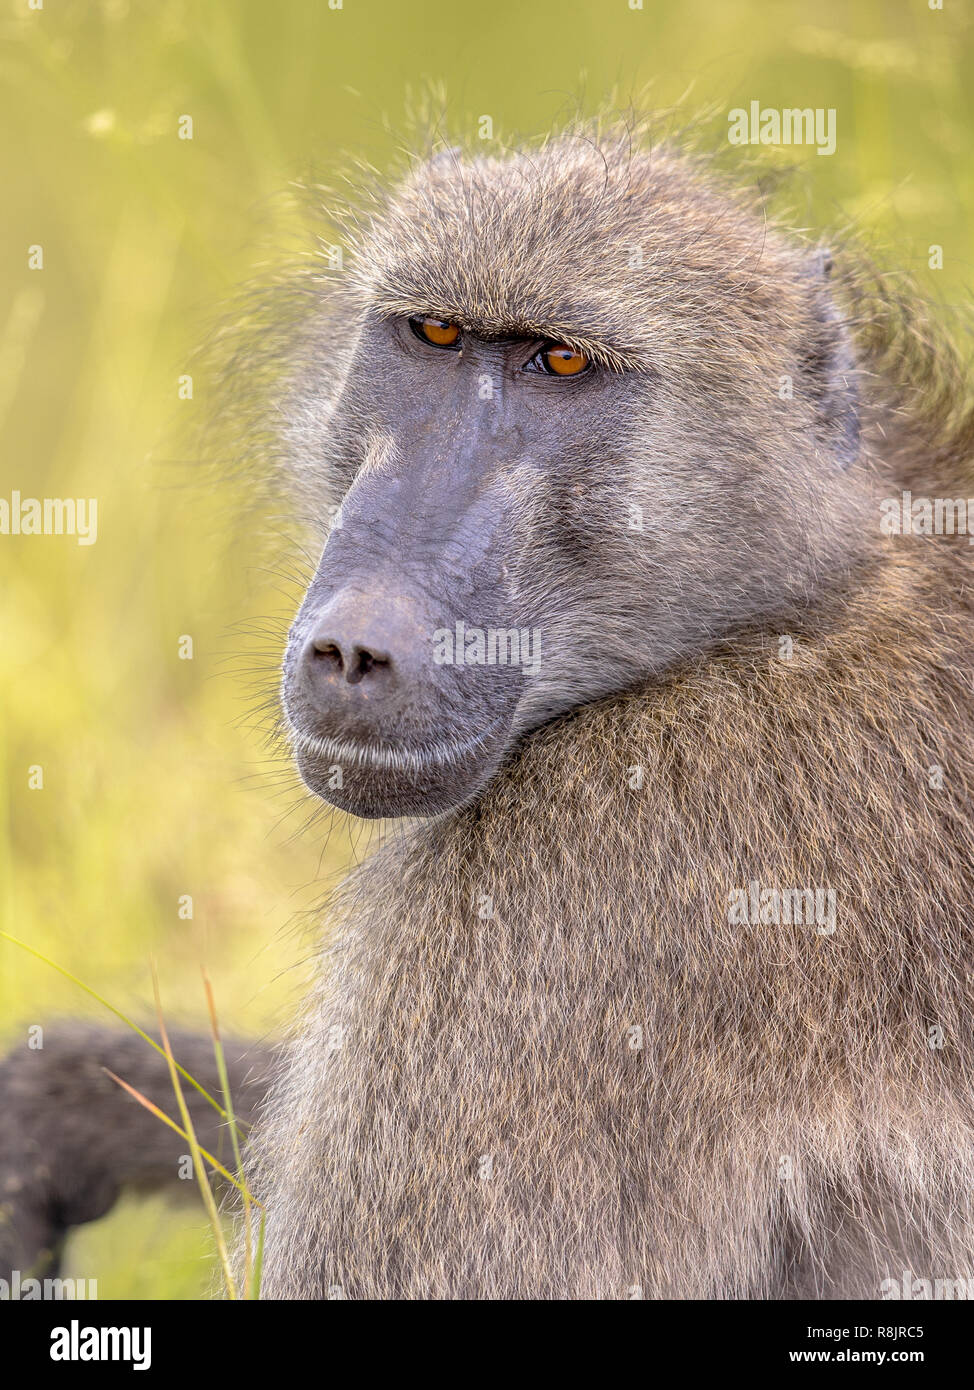 Chacma baboon (Papio ursinus) animal staring at camera portrait in Kruger national park South Africa Stock Photo